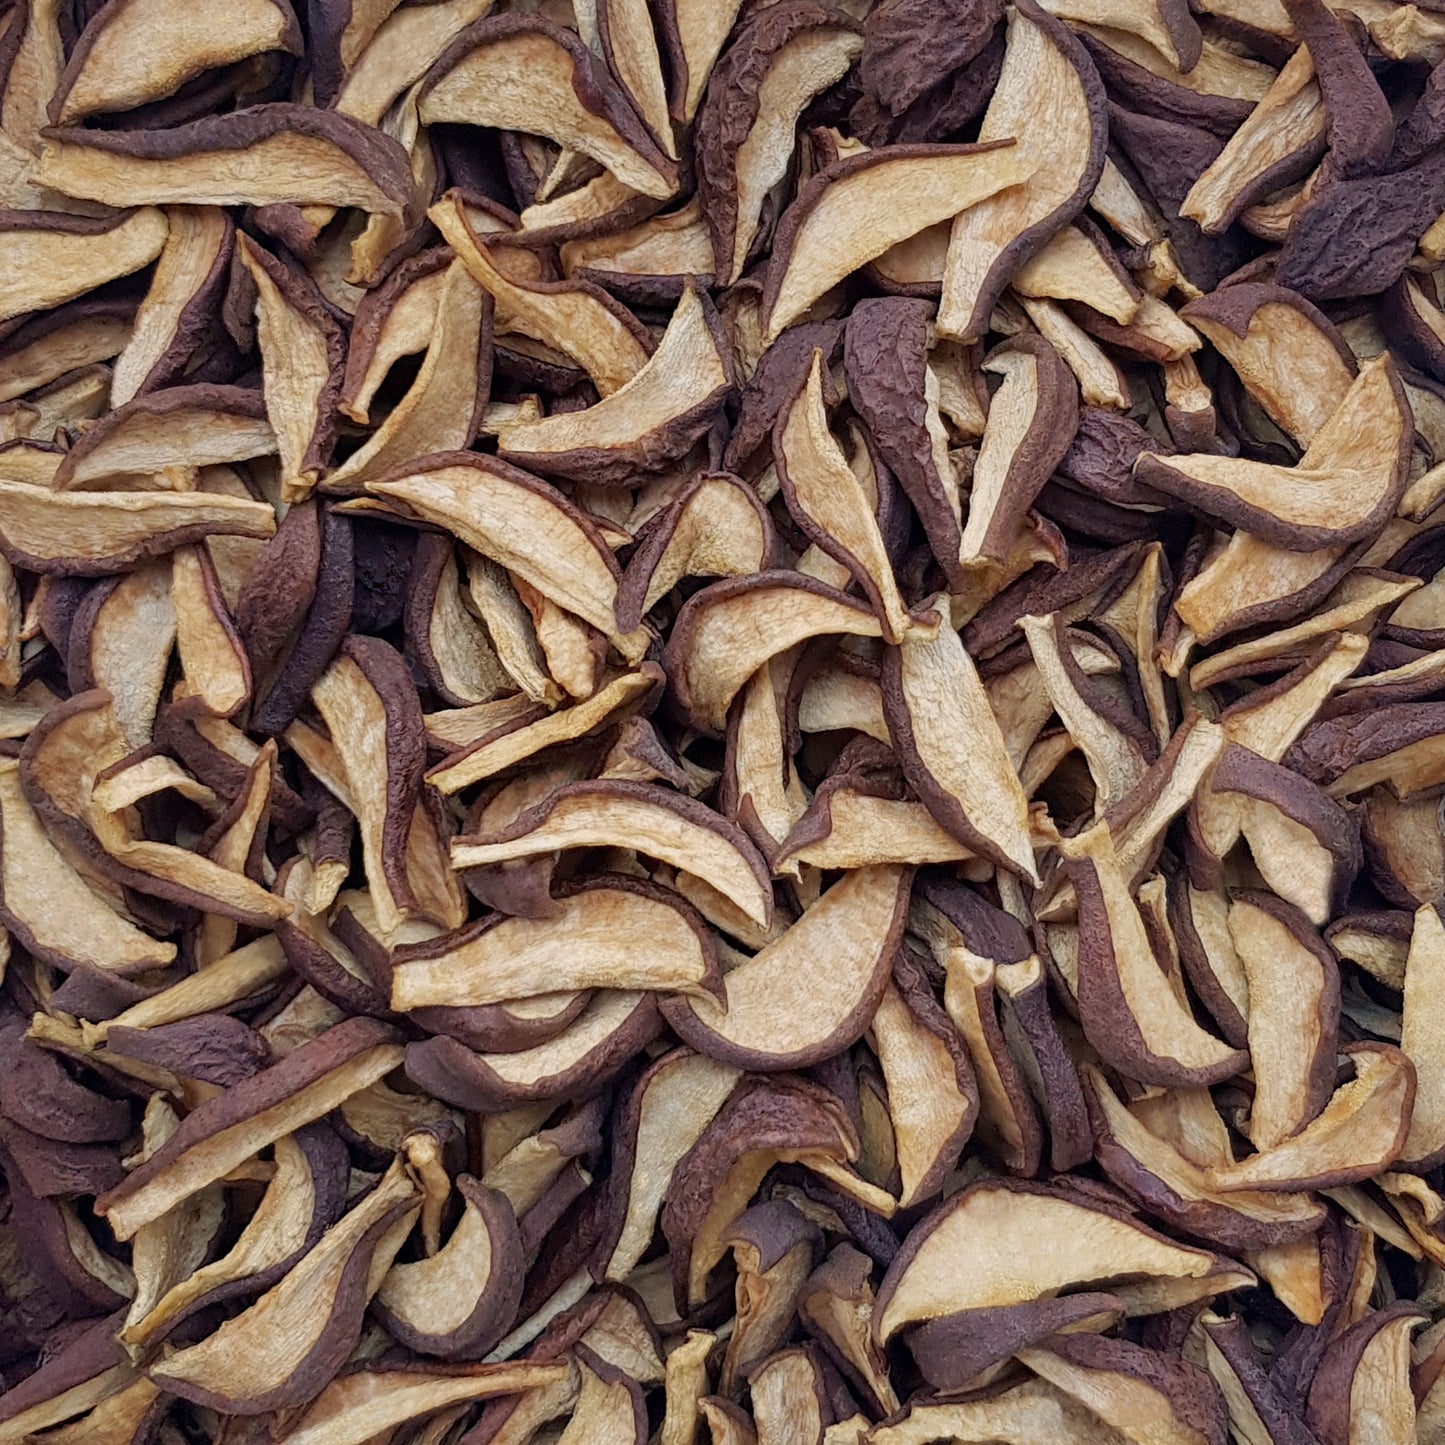 Full frame overhead image of BY NATURE Dried Pear Segments - preservative-free.